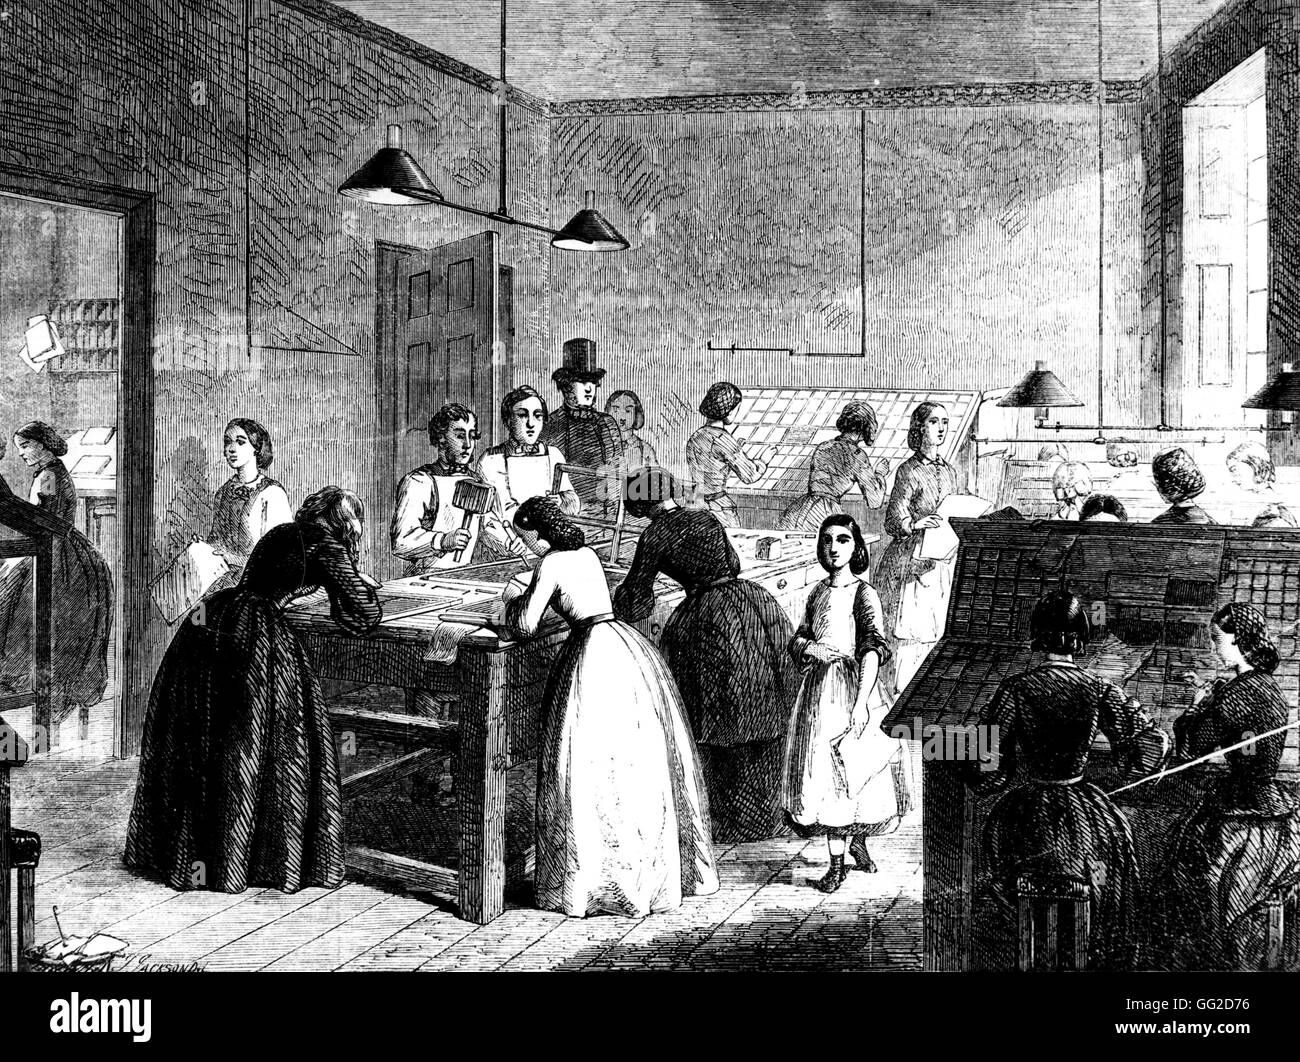 Printing Works / in 'The Illustrated London News', June 15 1861 1861 England Stock Photo